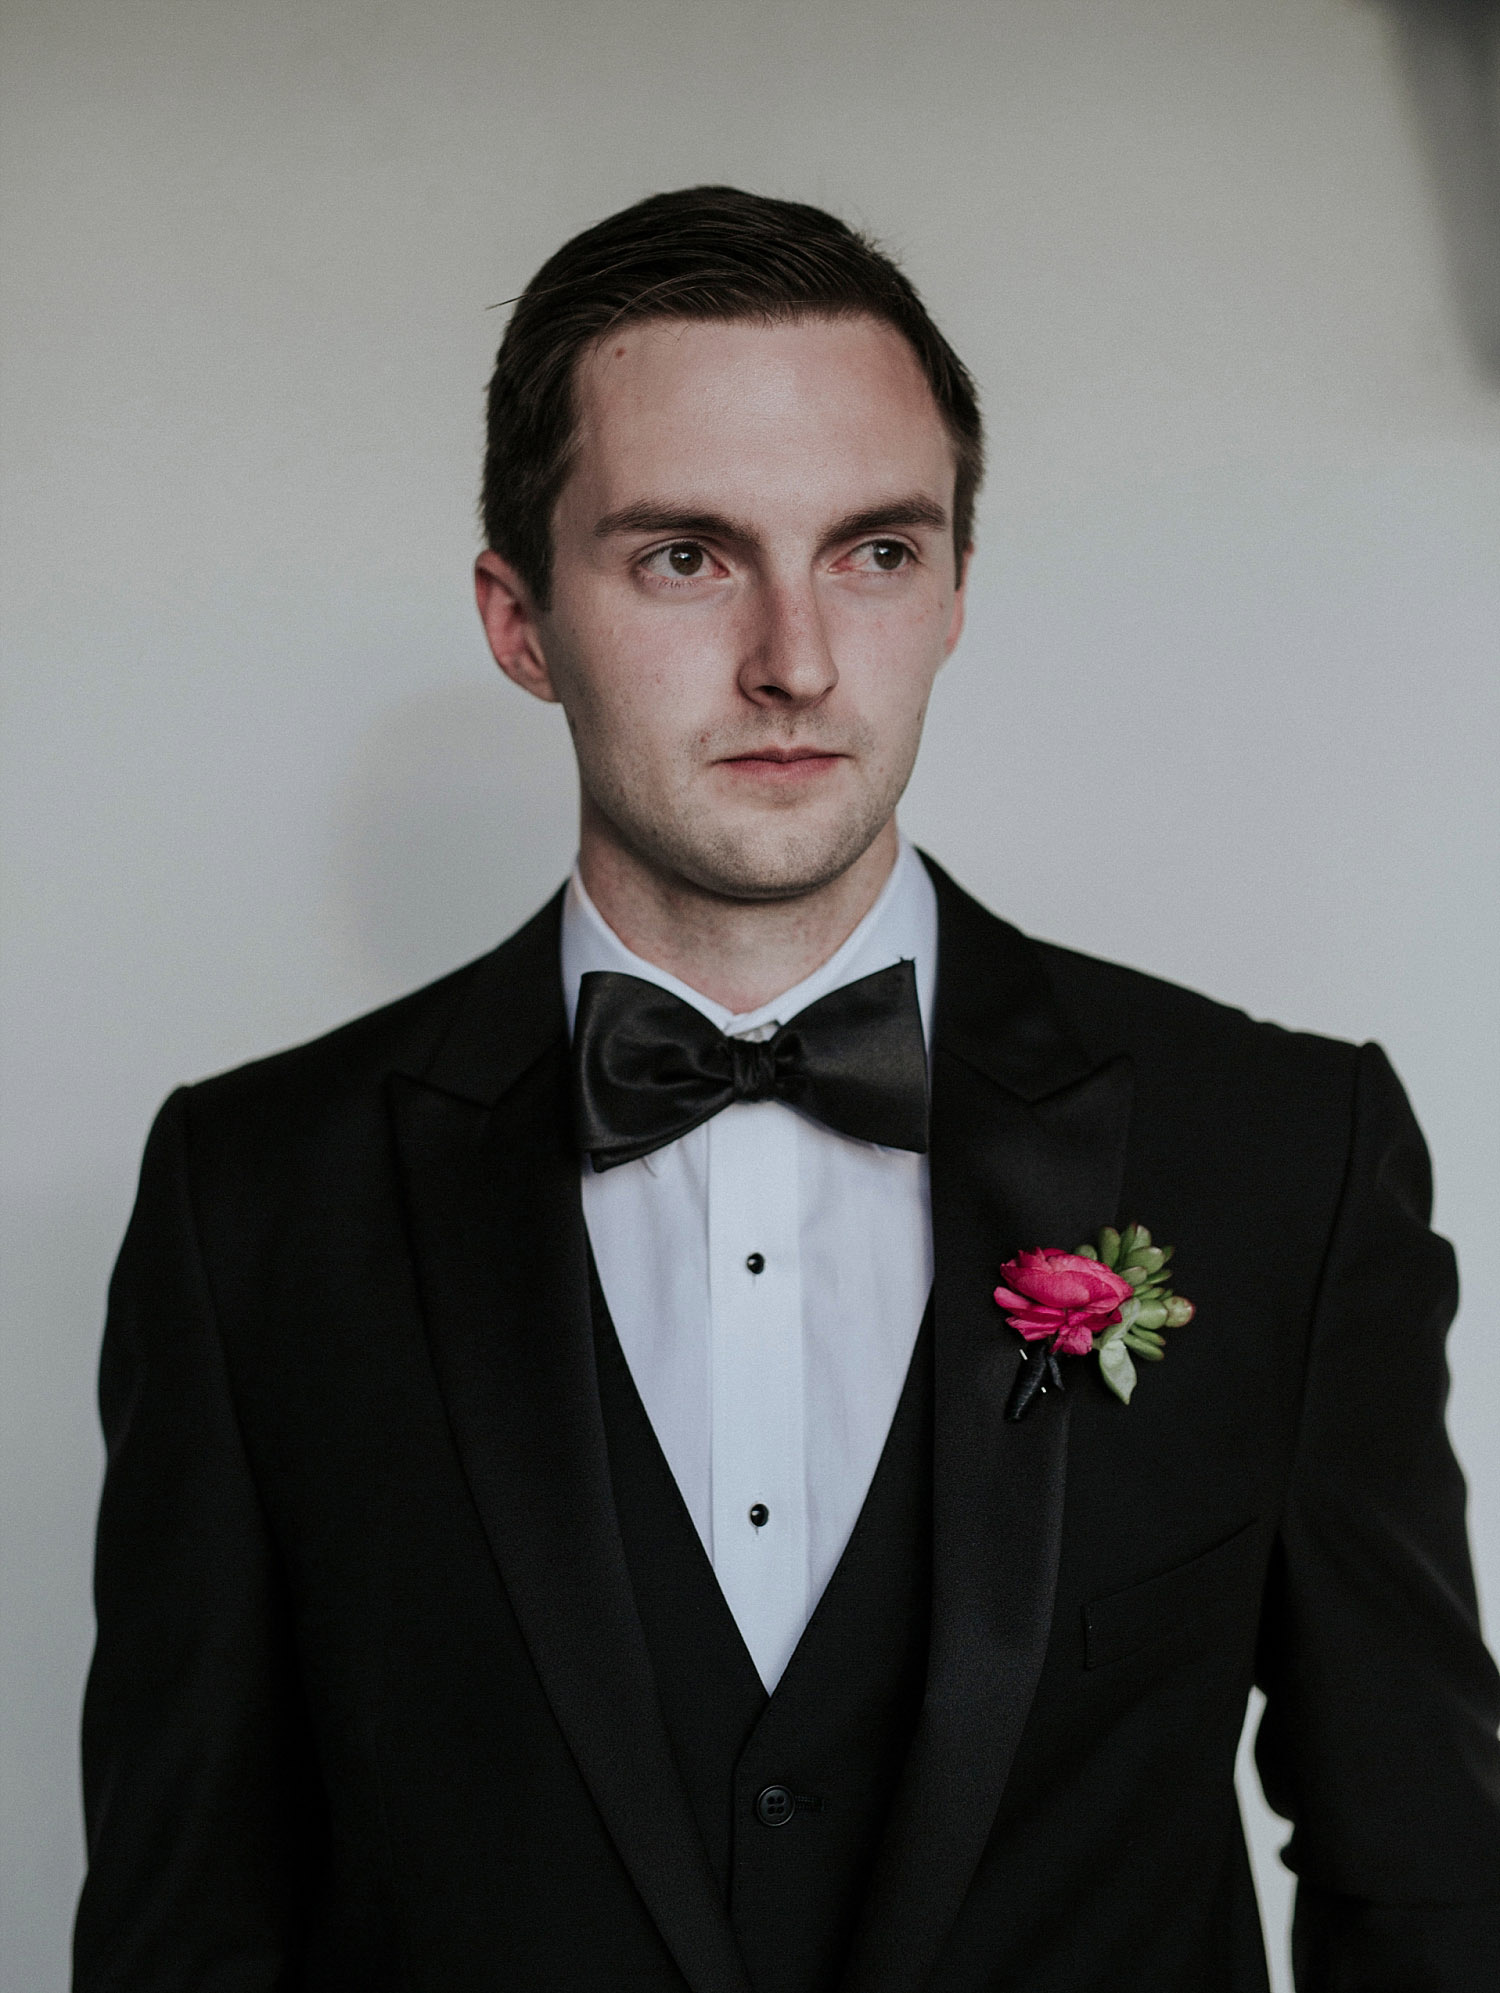 Groom wearing a black tux and pink boutonniere